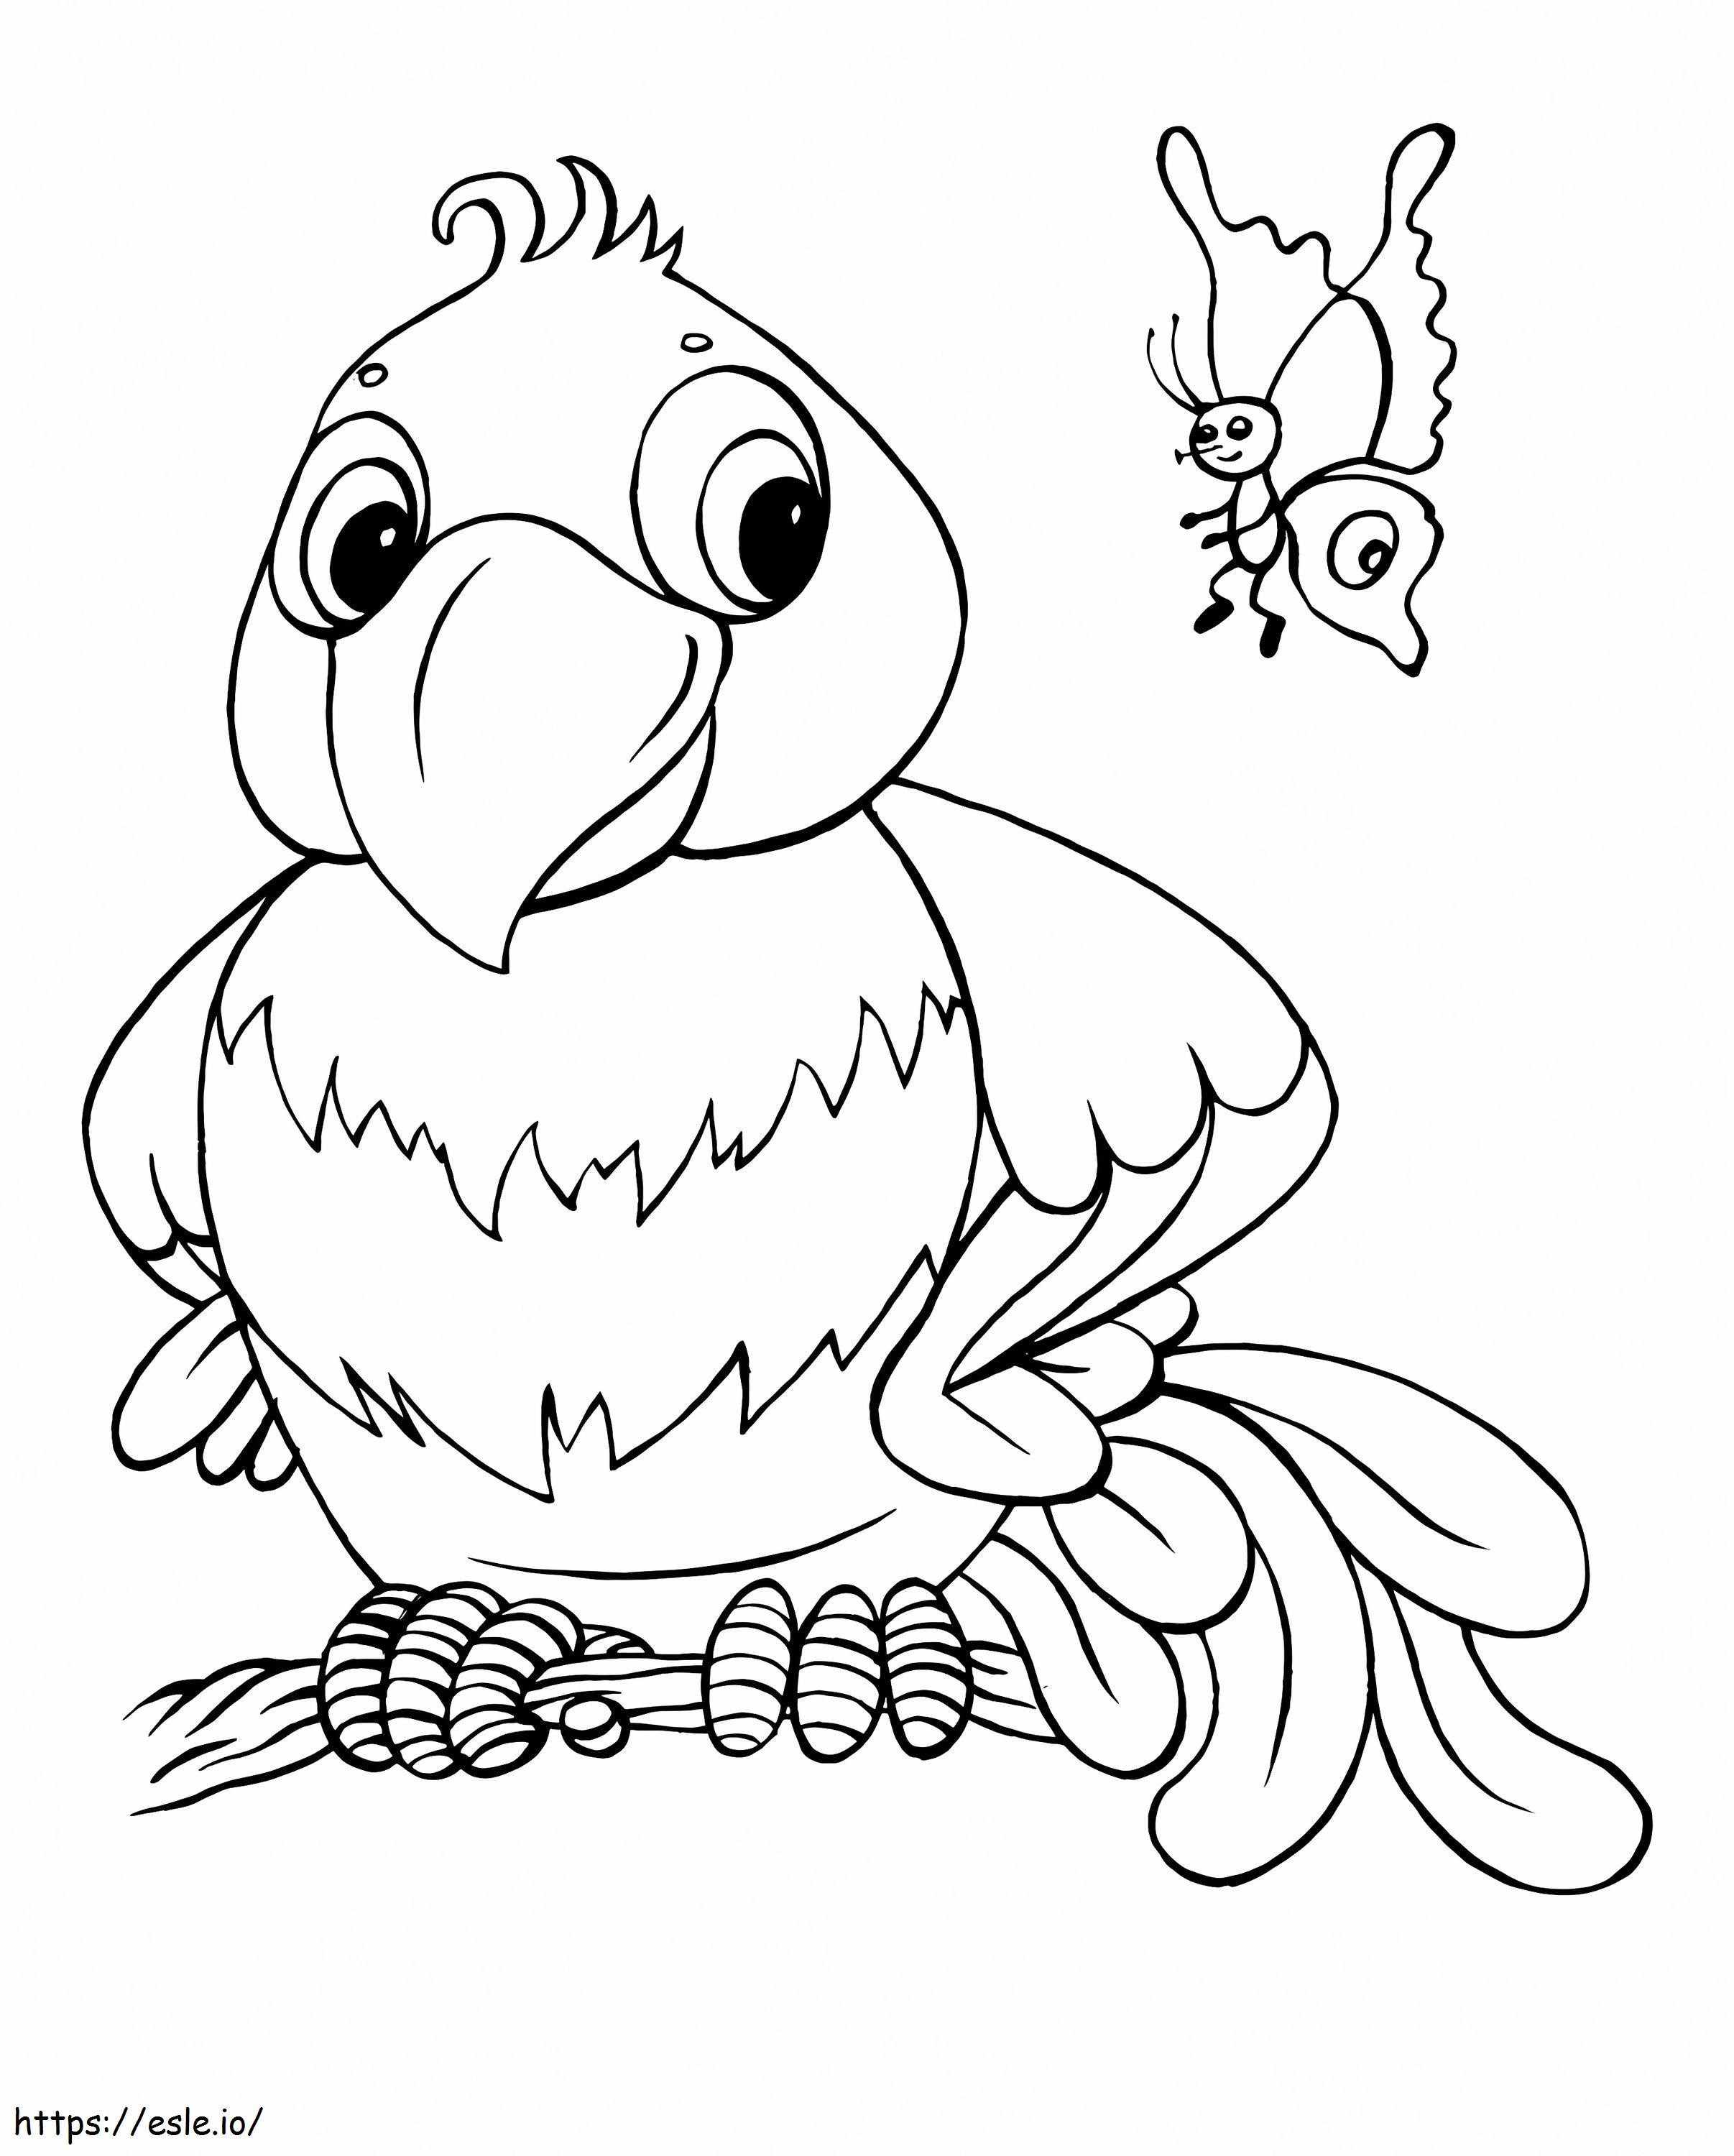 1560411970 Cartoon Parrot And Butterfly A4 coloring page